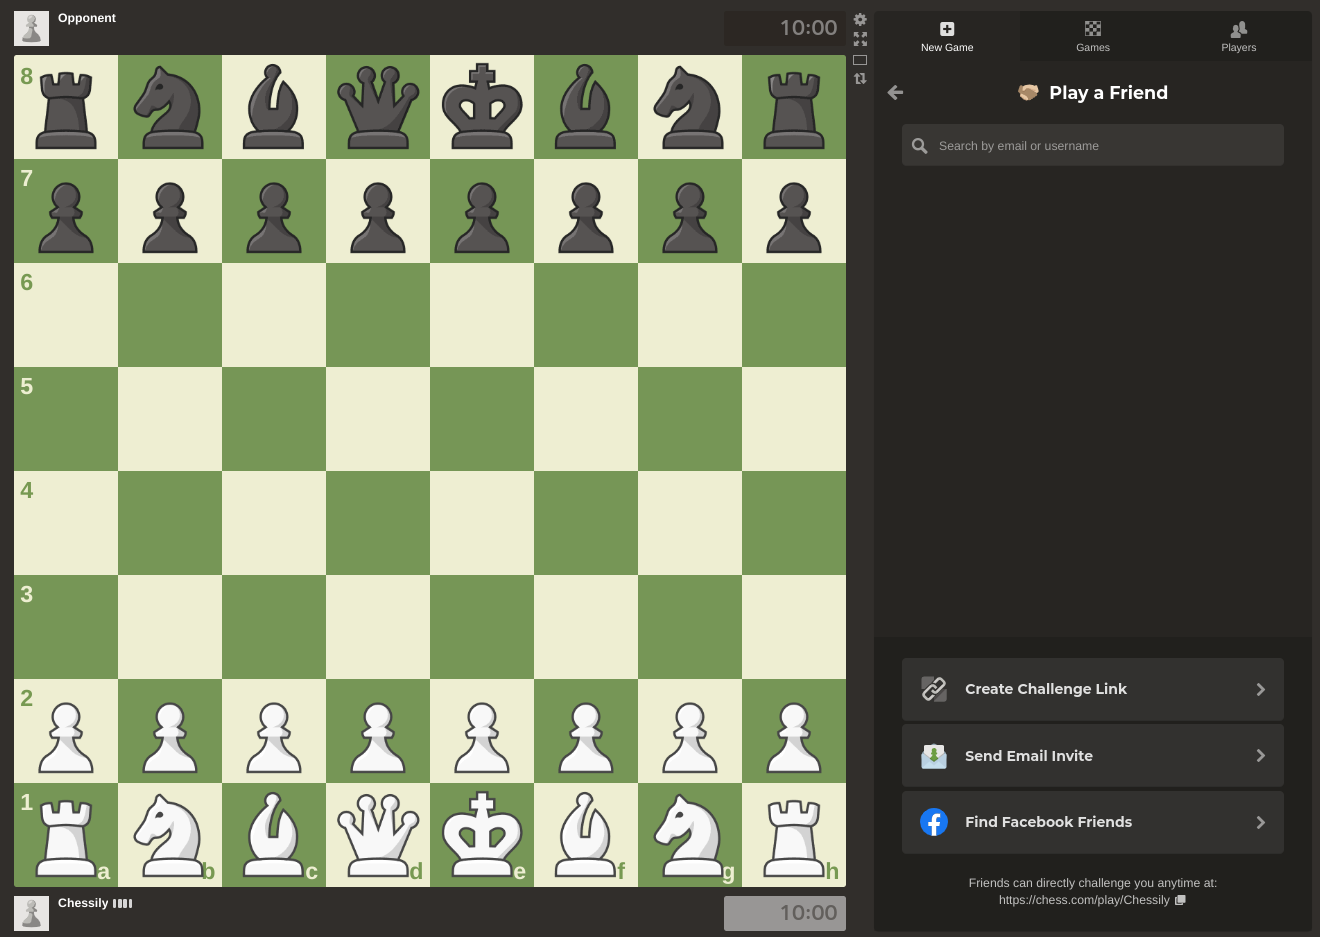 To Challenge a Friend to an Online Chess Game, Click the Create Challenge Link Button